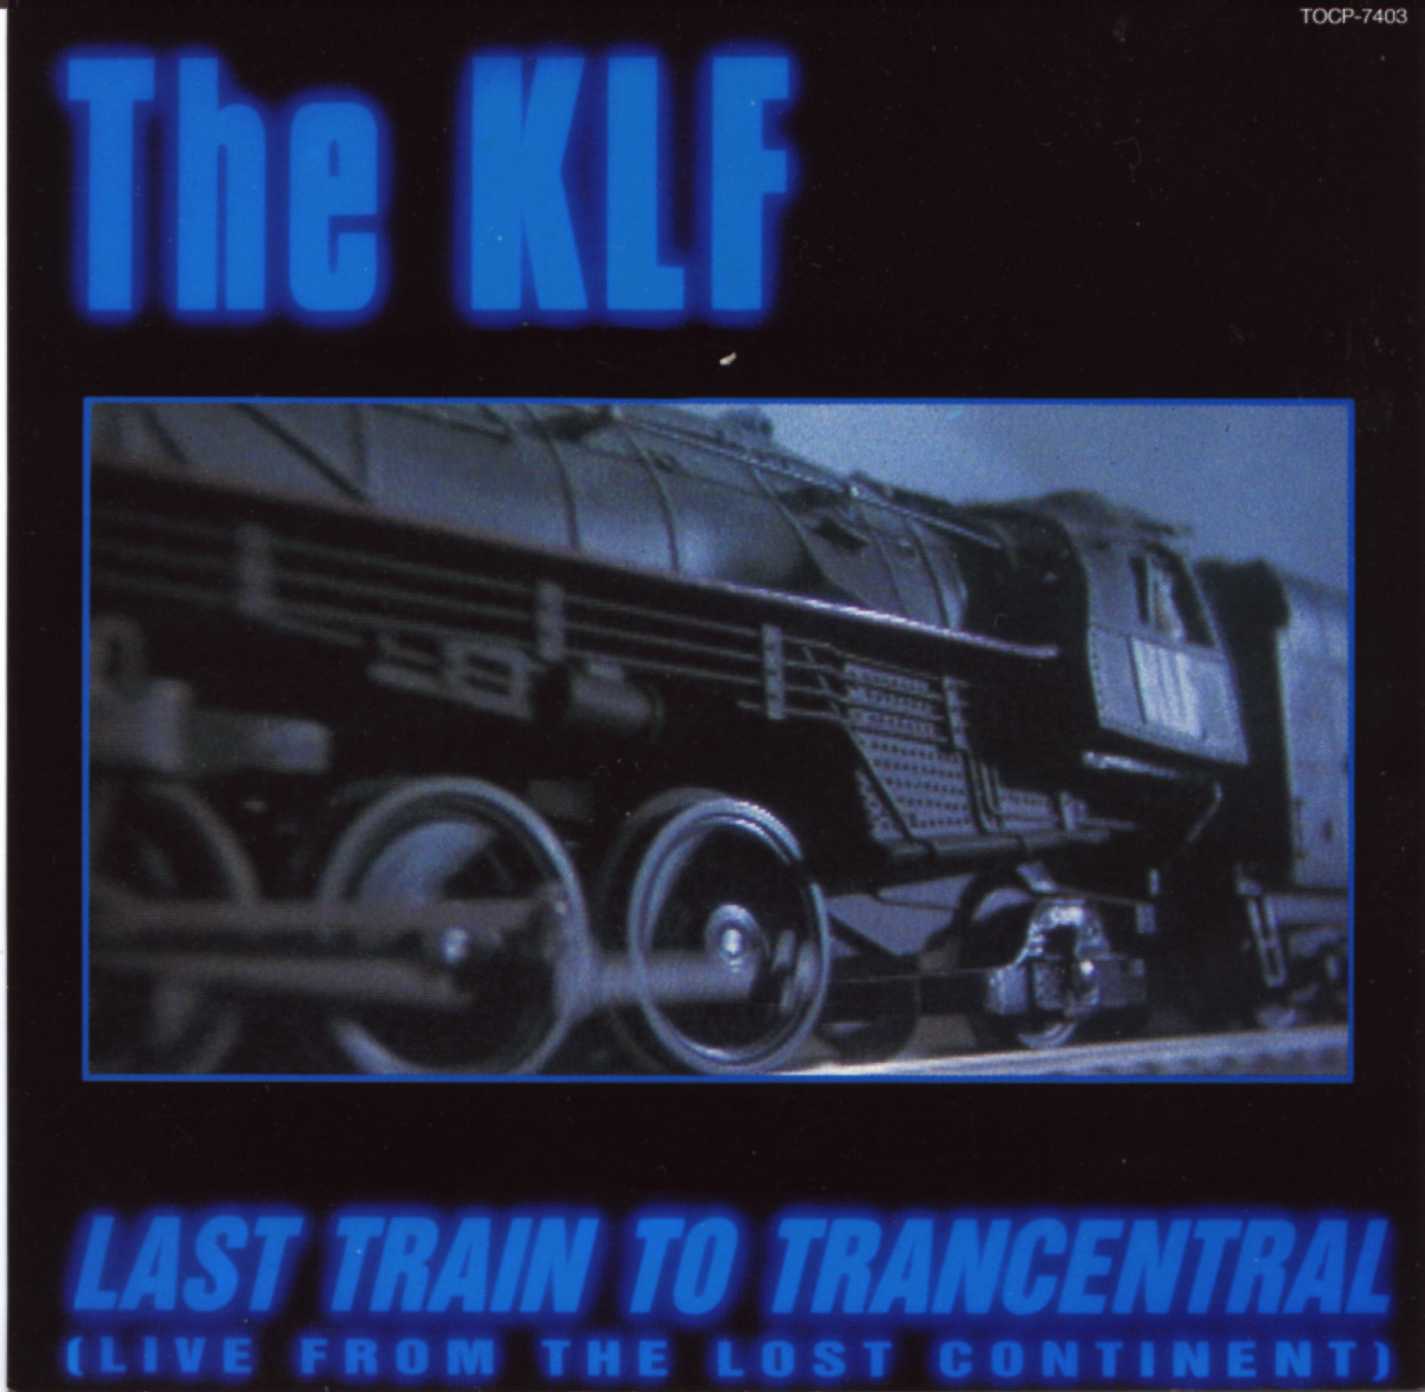 klf_last_train_to_trancentral_front.jpg